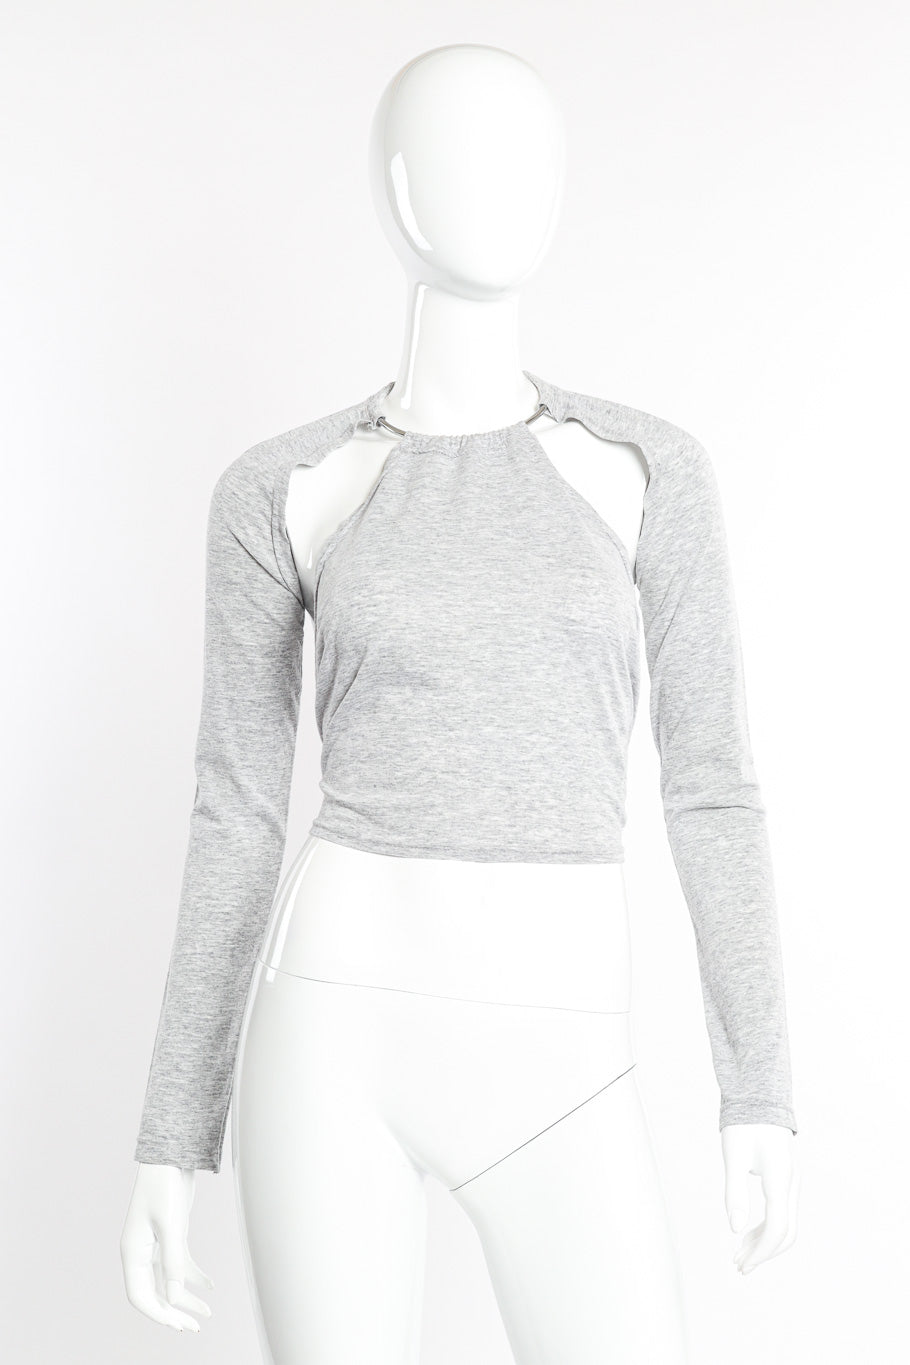 Cut-Out Sleeve Ring Collar Halter Top by Margiela on mannequin @recessla